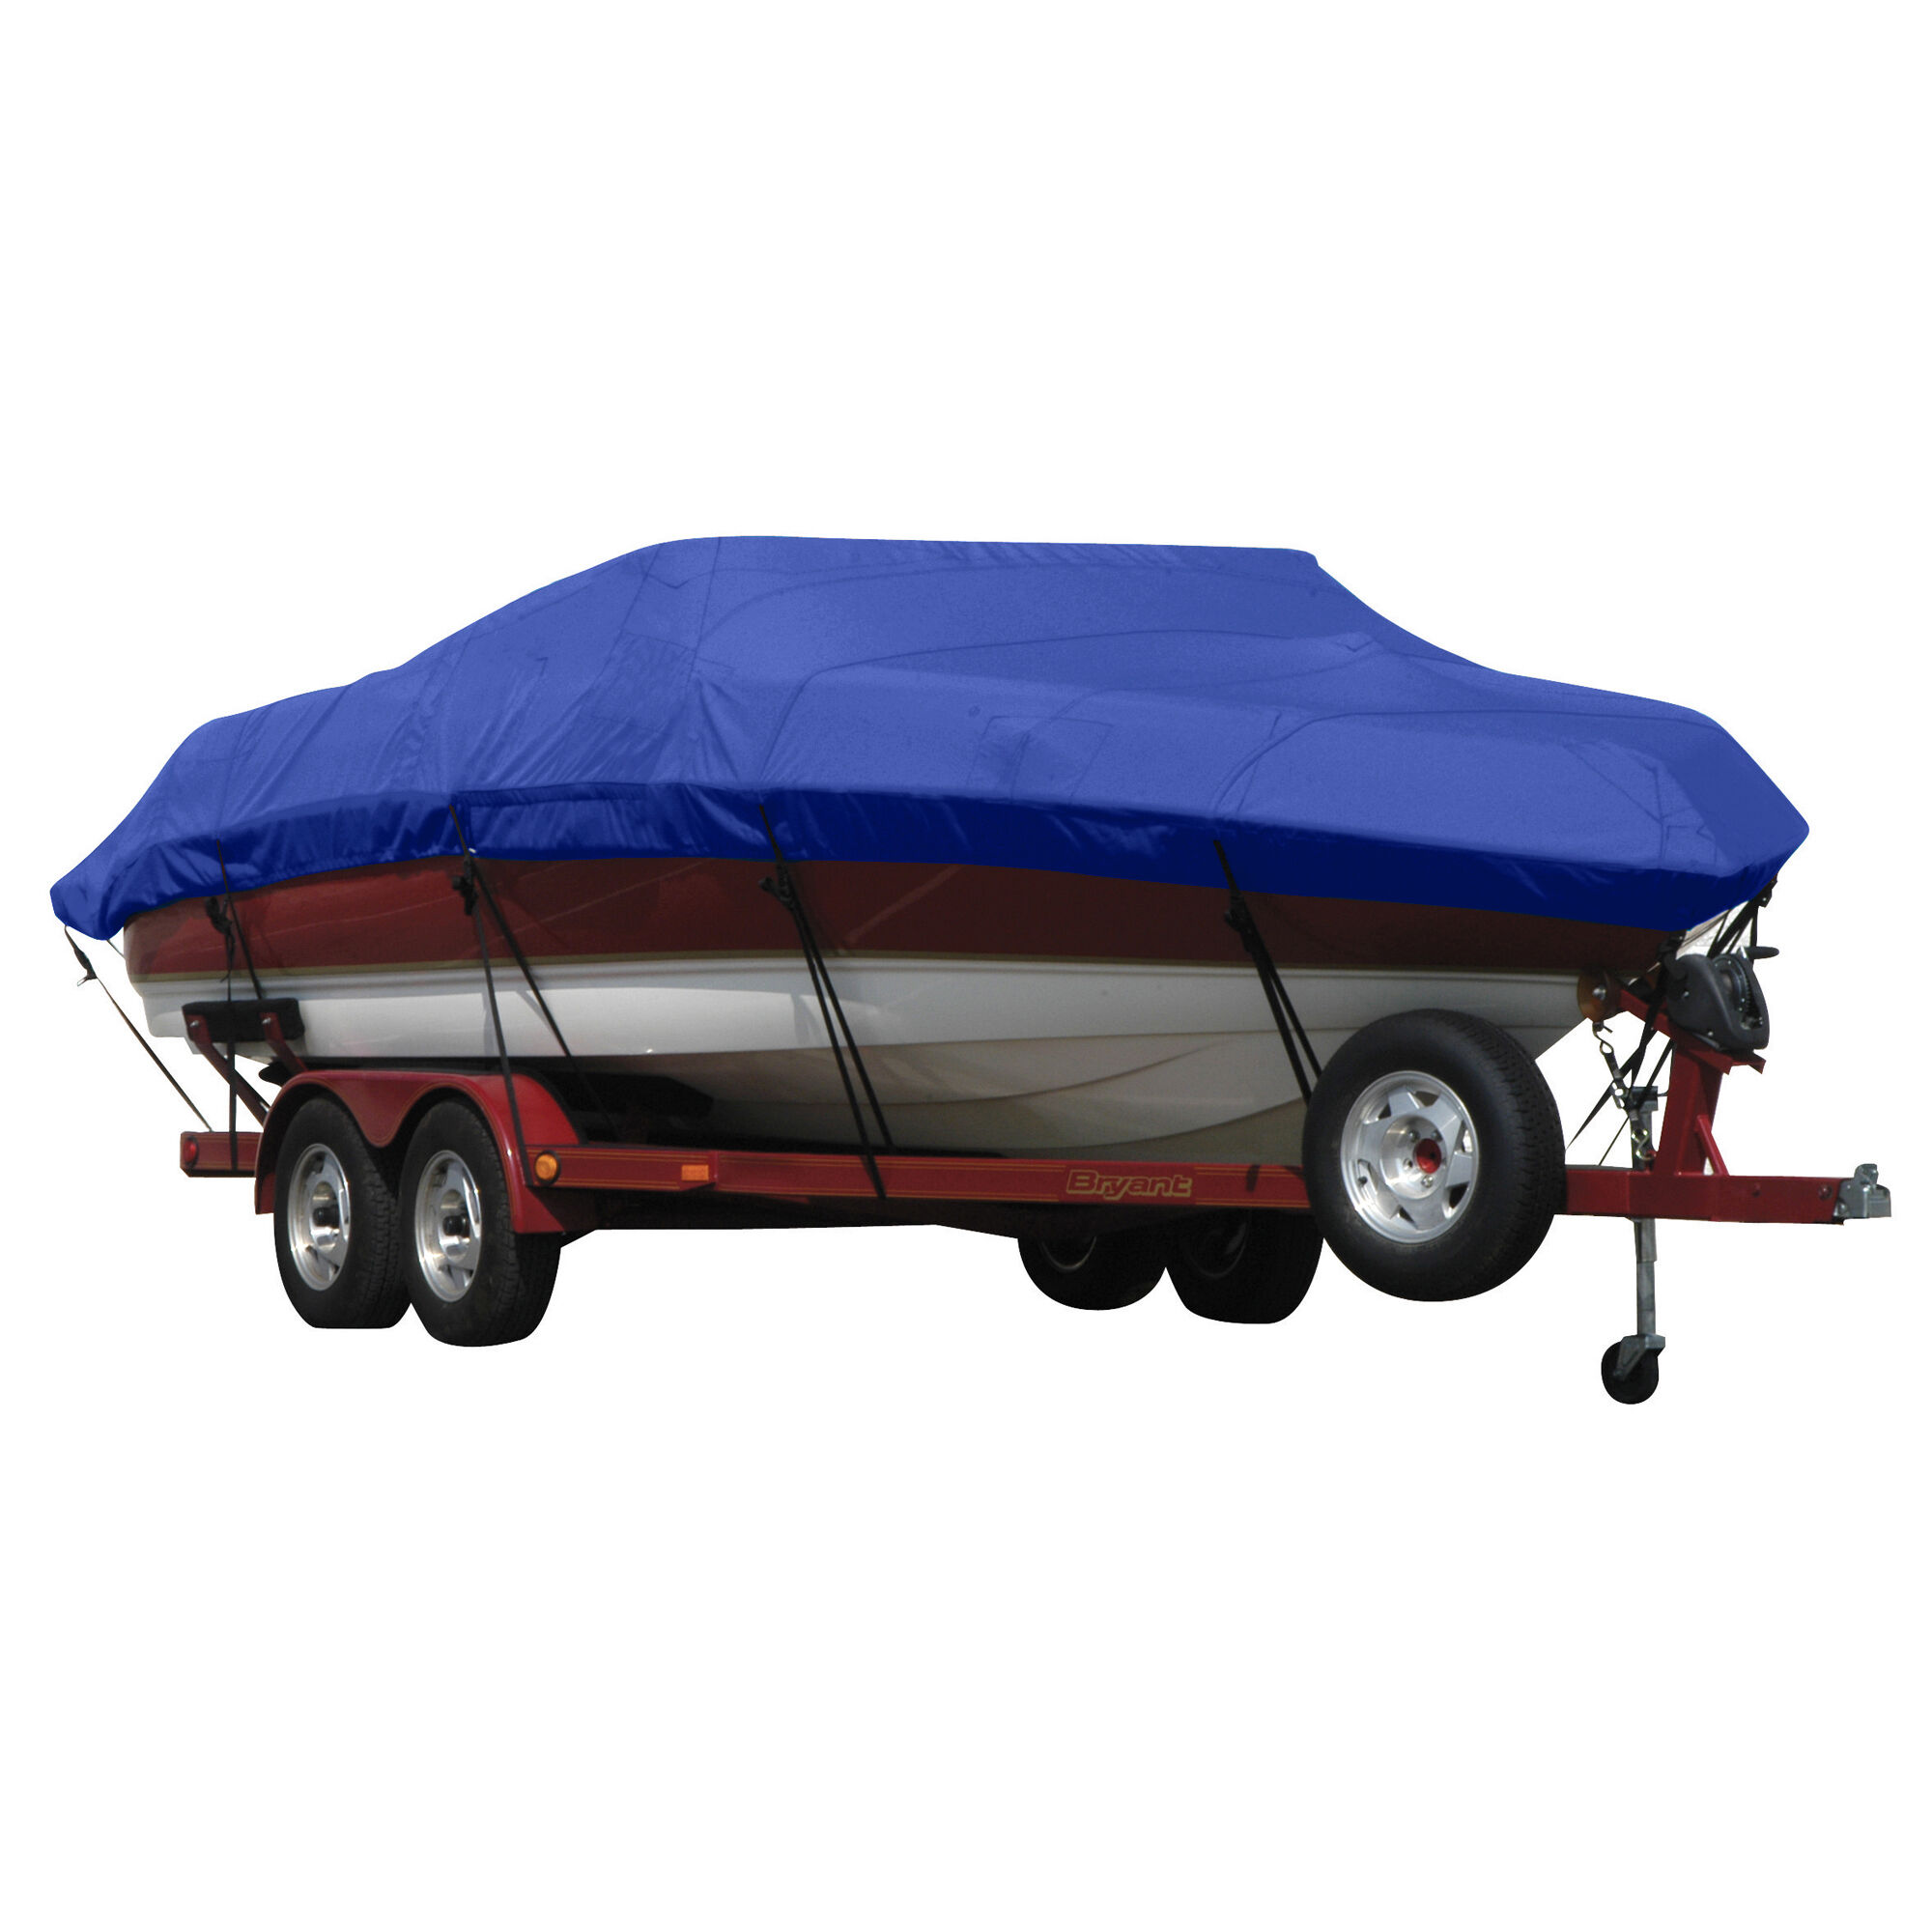 Covermate MARIAH SHABAH 200 BOW RIDER I/O Boat Cover in Ocean Blue Acrylic